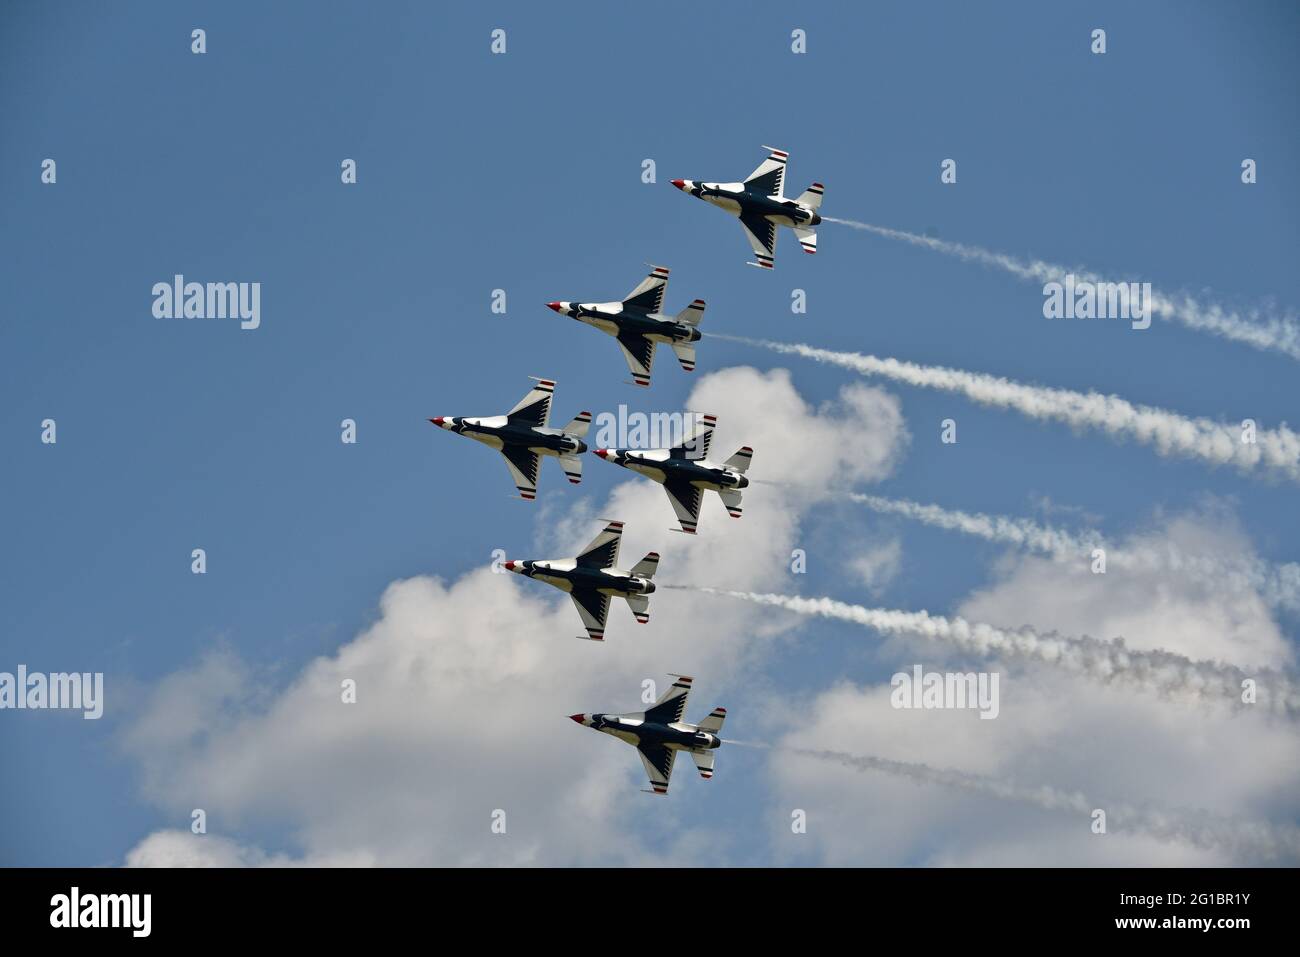 US Air Force Thunderbirds, F-16 fighter jets, air demonstration squadron, in flight formation at the EAA Fly-In (AirVenture), Oshkosh, Wisconsin, USA Stock Photo